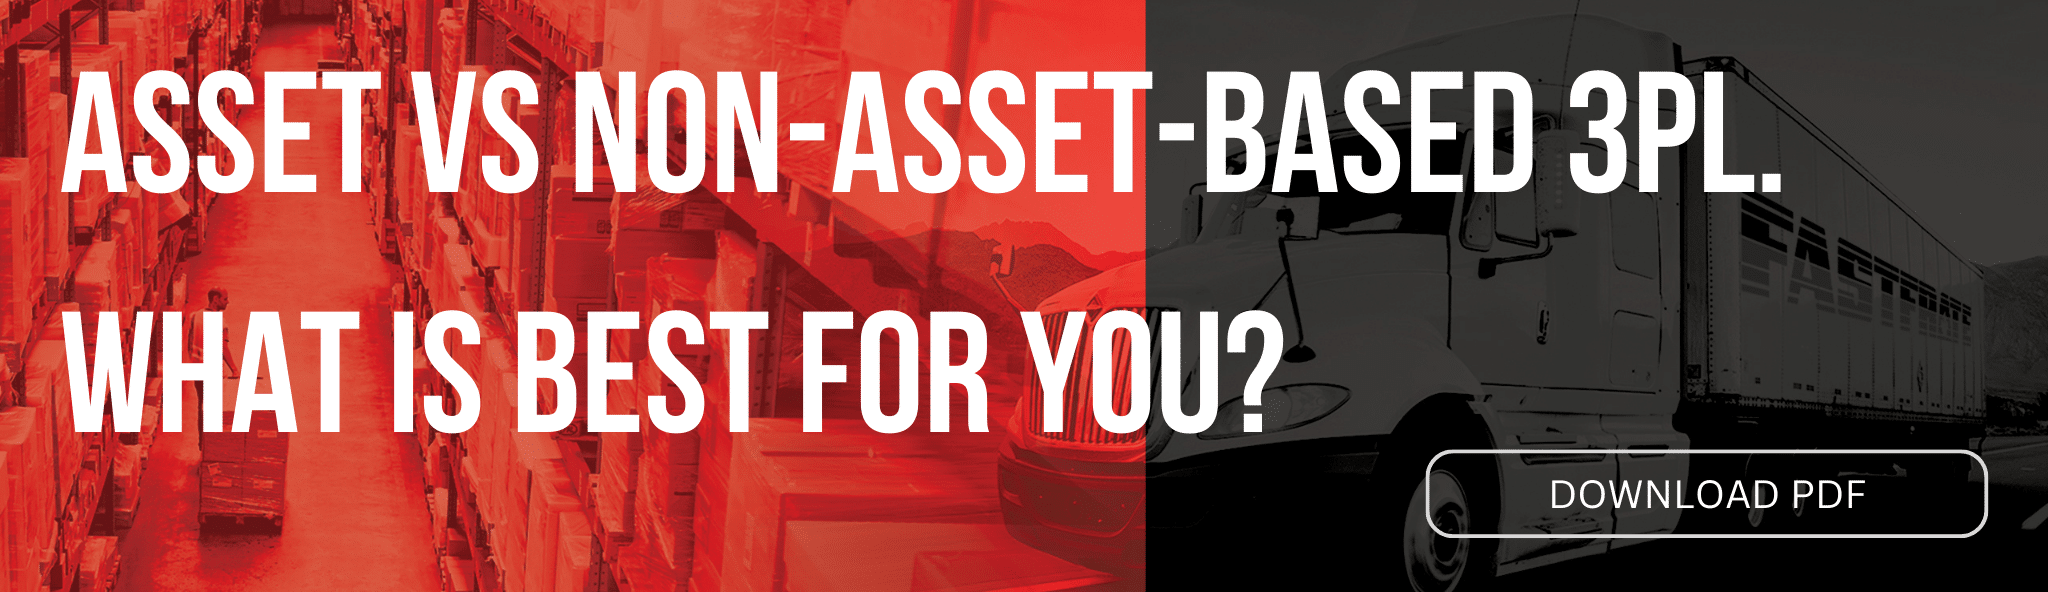 Asset vs Non-Asset Based 3PL. What is best for you?